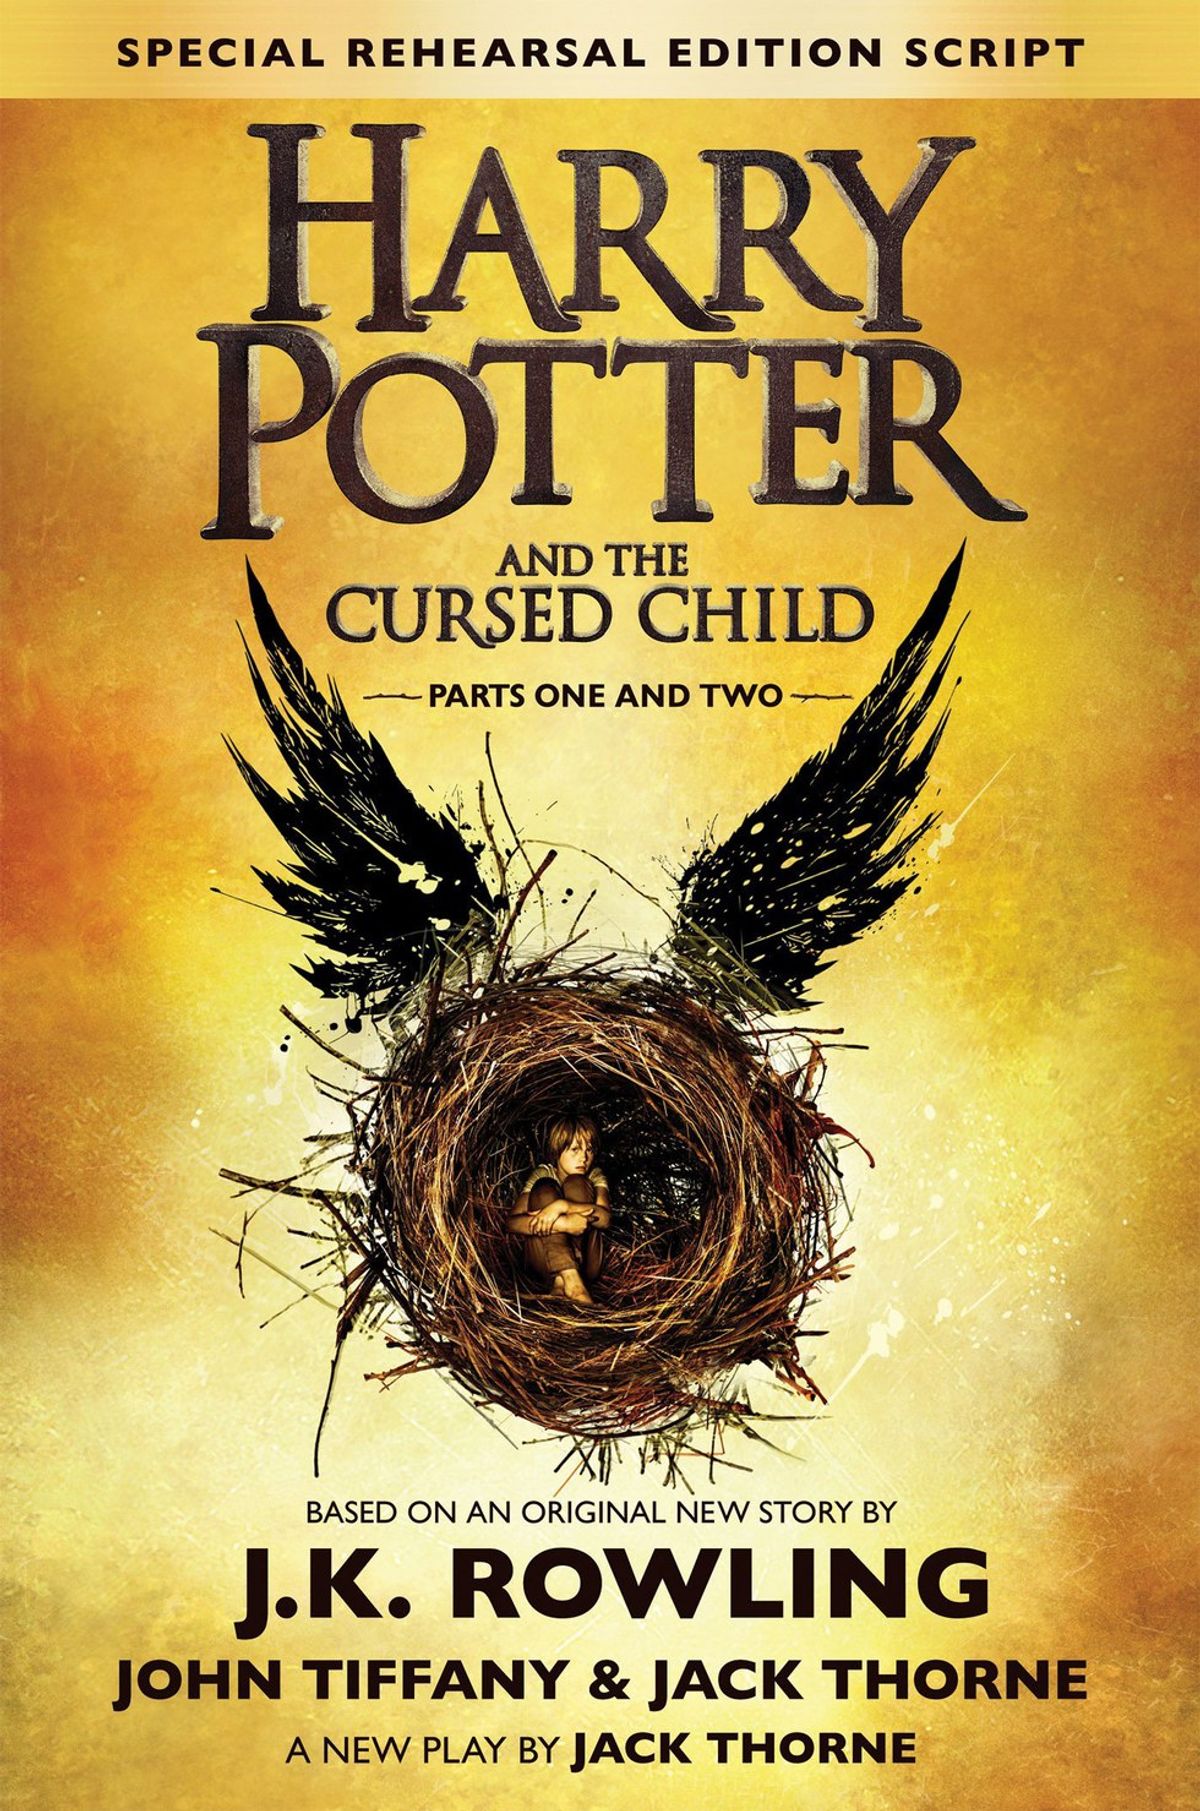 A Potterhead's Reaction To 'The Cursed Child'